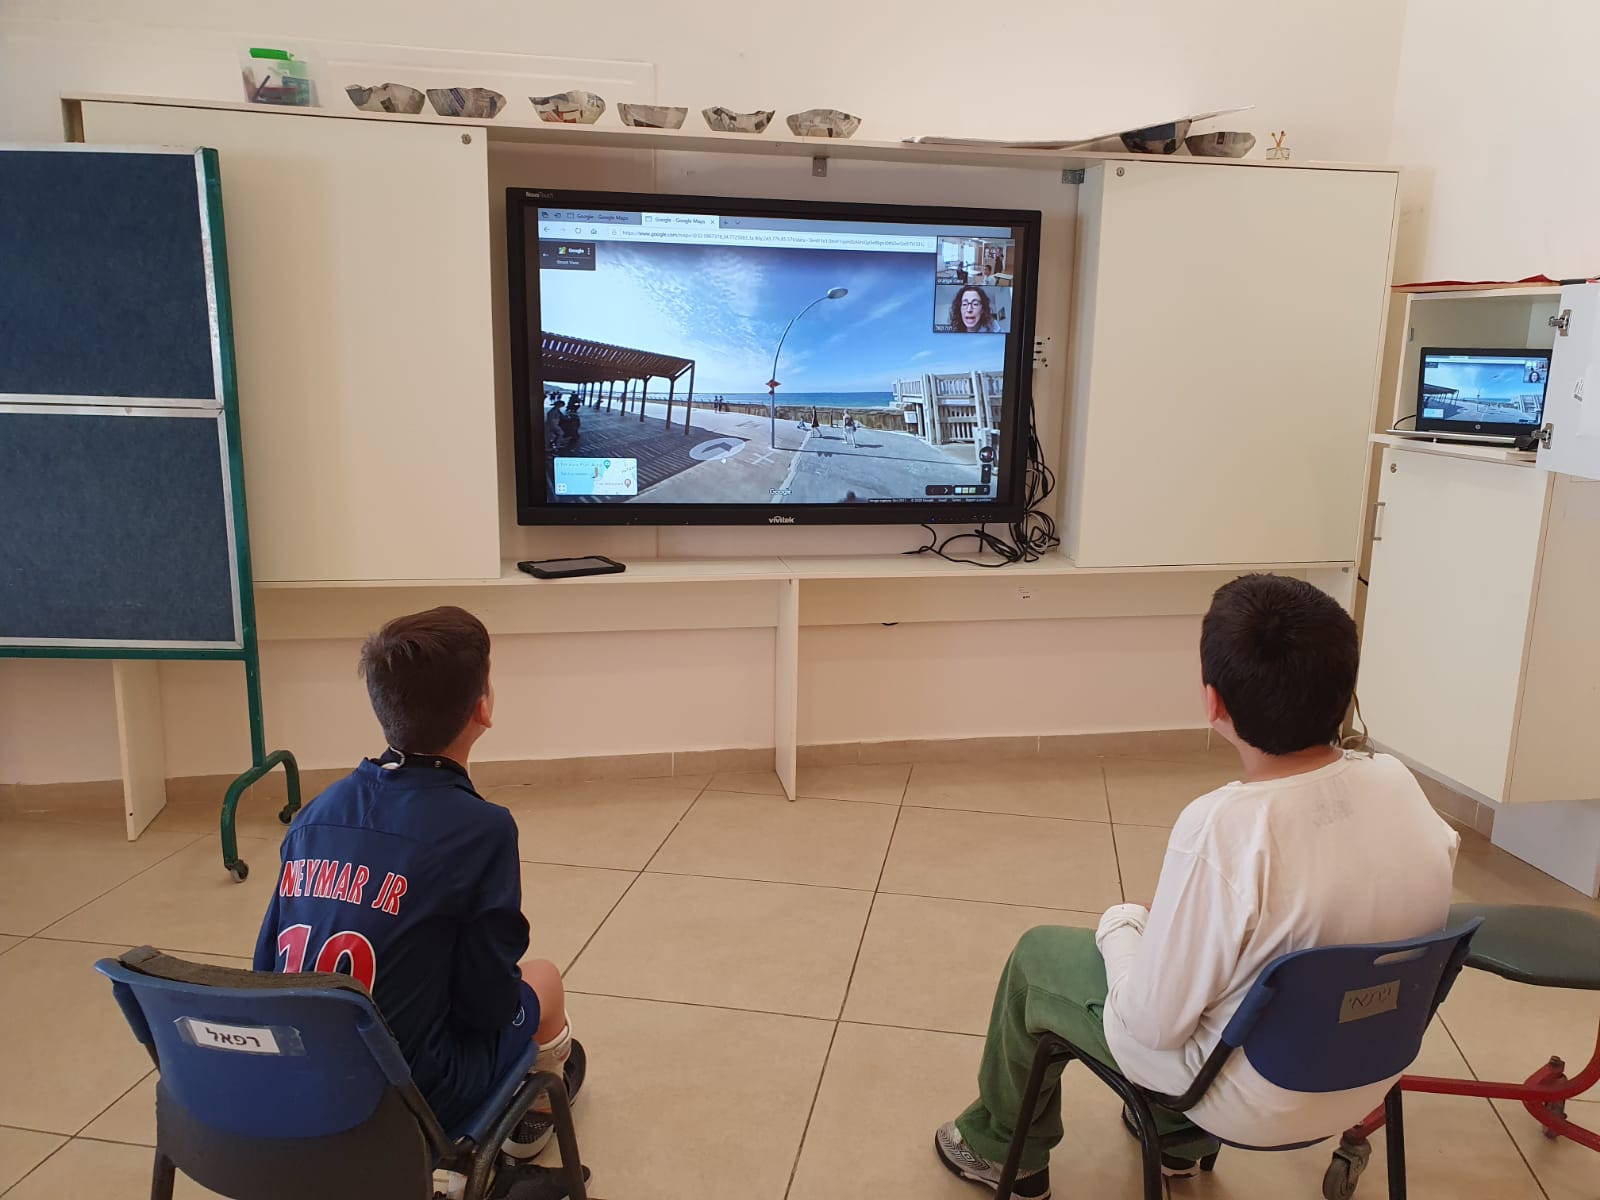 Students in a classroom watching something on a big screen